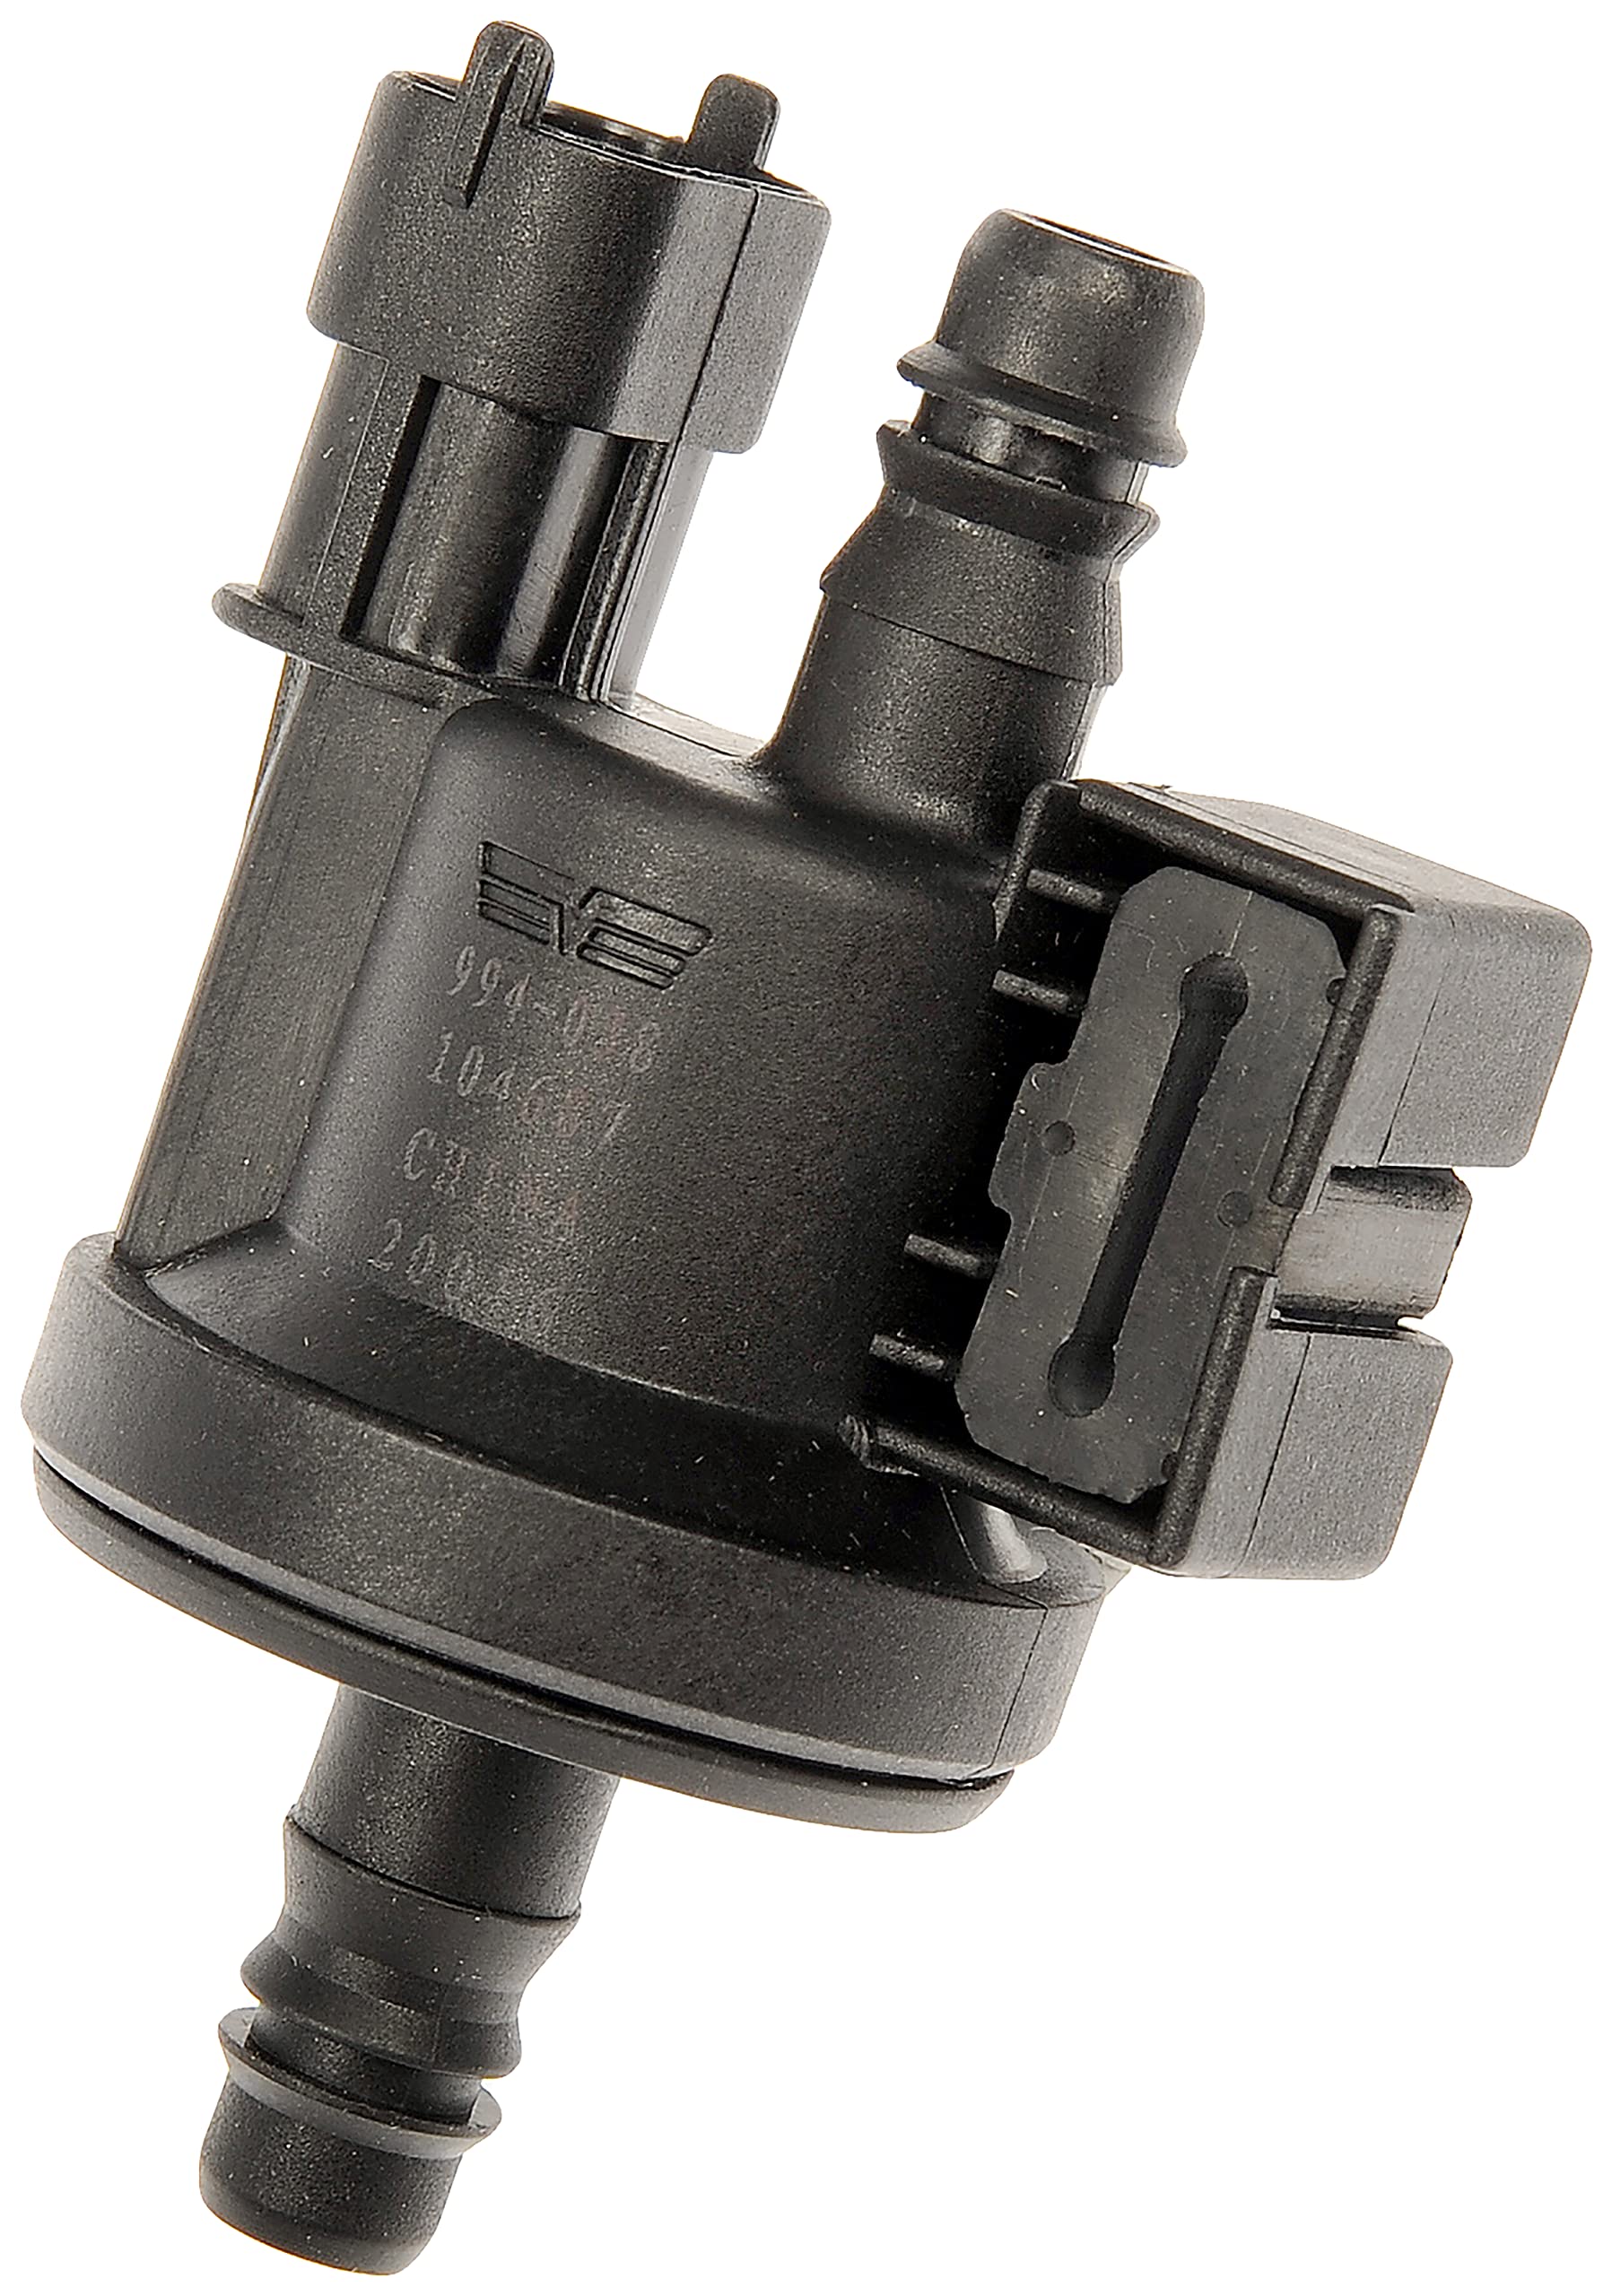 Dorman 994-038 Vapor Canister Purge Valve Compatible with Select Ford Models